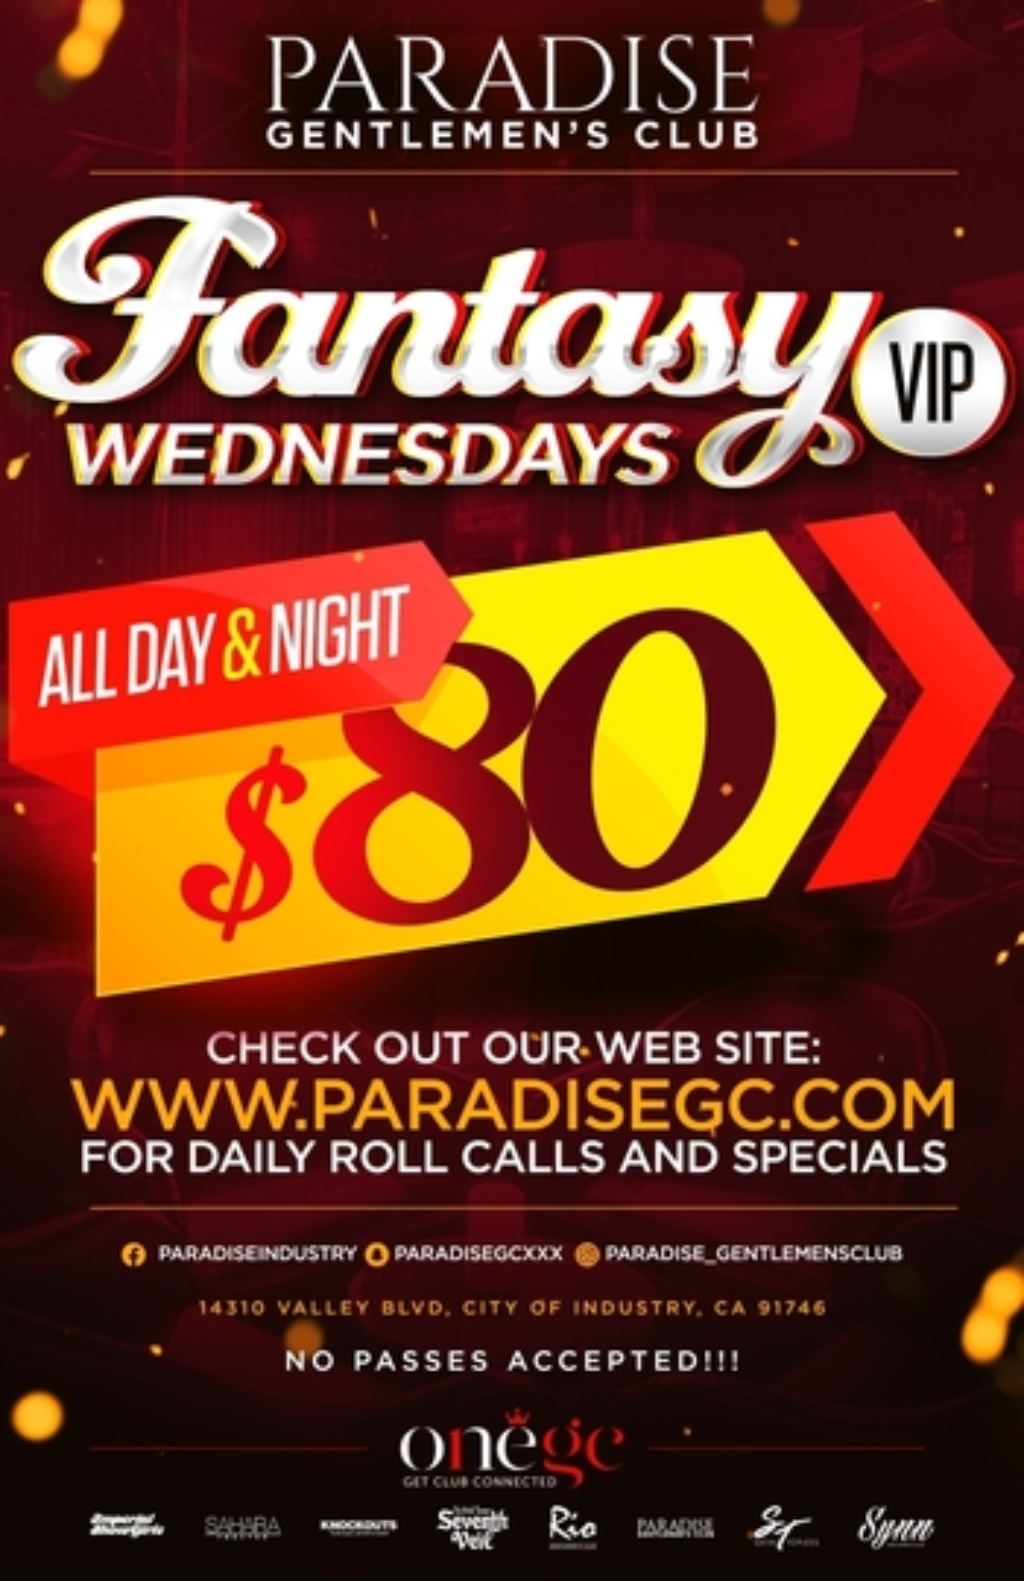 $80 VIPS ALL DAY AND NIGHT